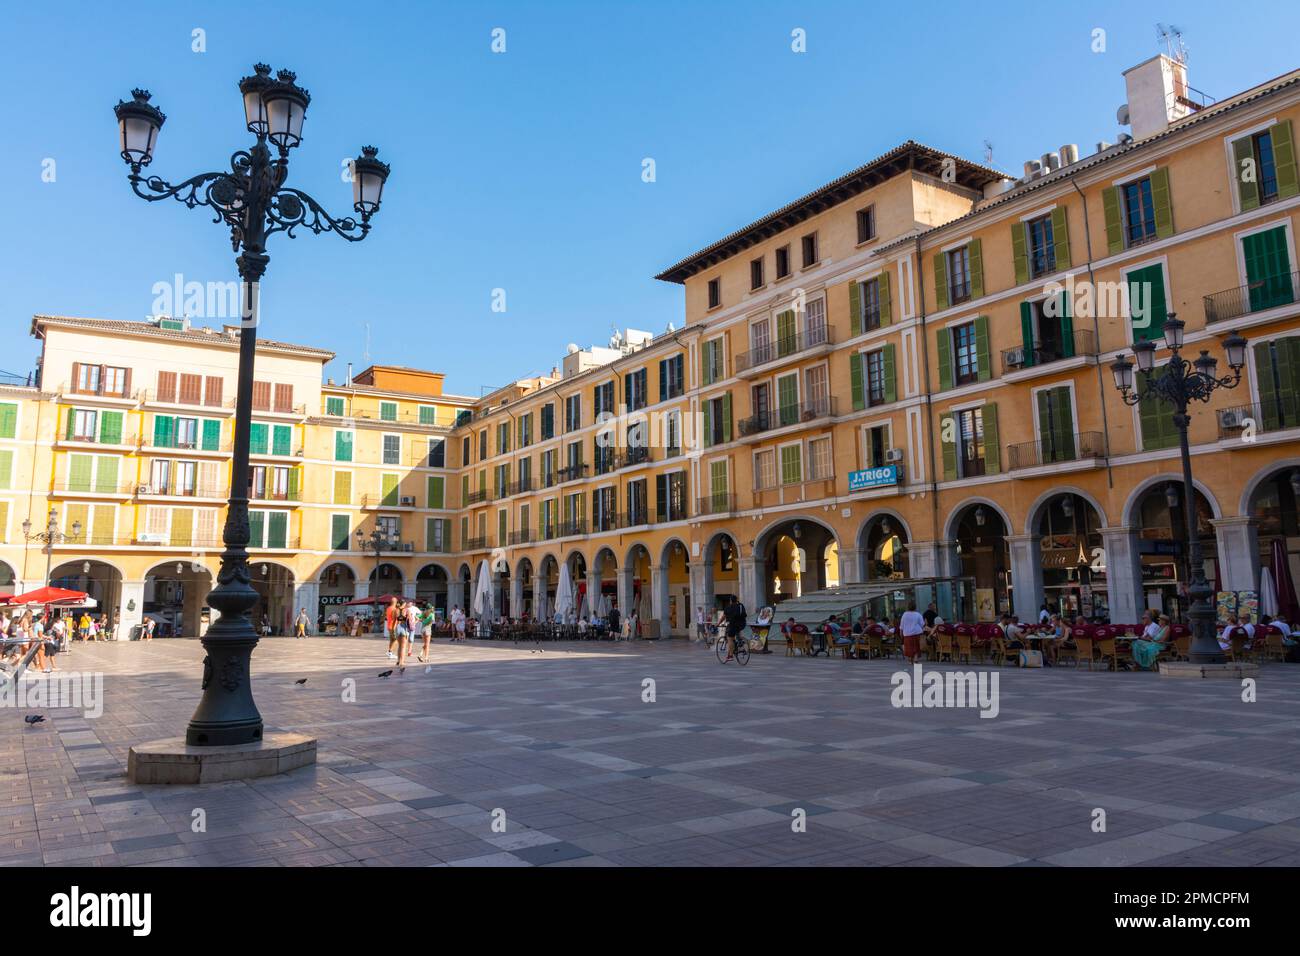 Palma, Mallorca, Balearic Islands, Spain. July 21, 2022 - The buildings of the Plaza Mayor in Palma, the main square surrounded by arcades, with terra Stock Photo